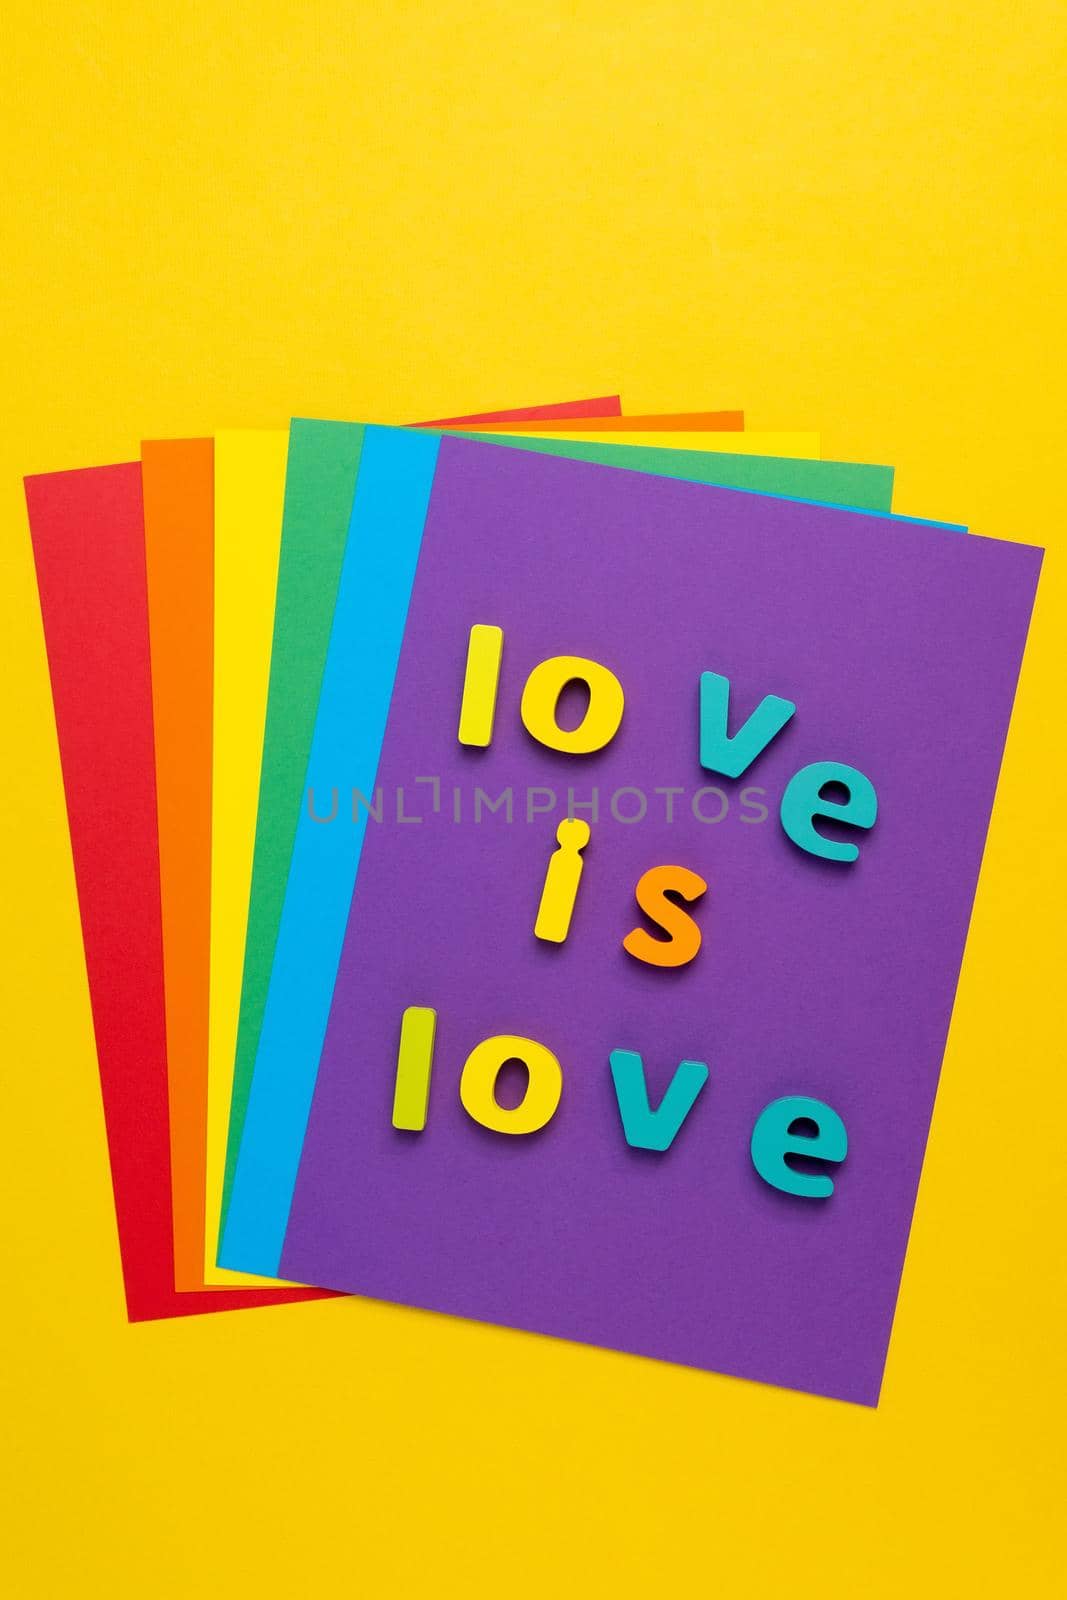 love is love on a yellow multicolored background. Symbol of tolerance on gay pride rainbow colors painted. Top view